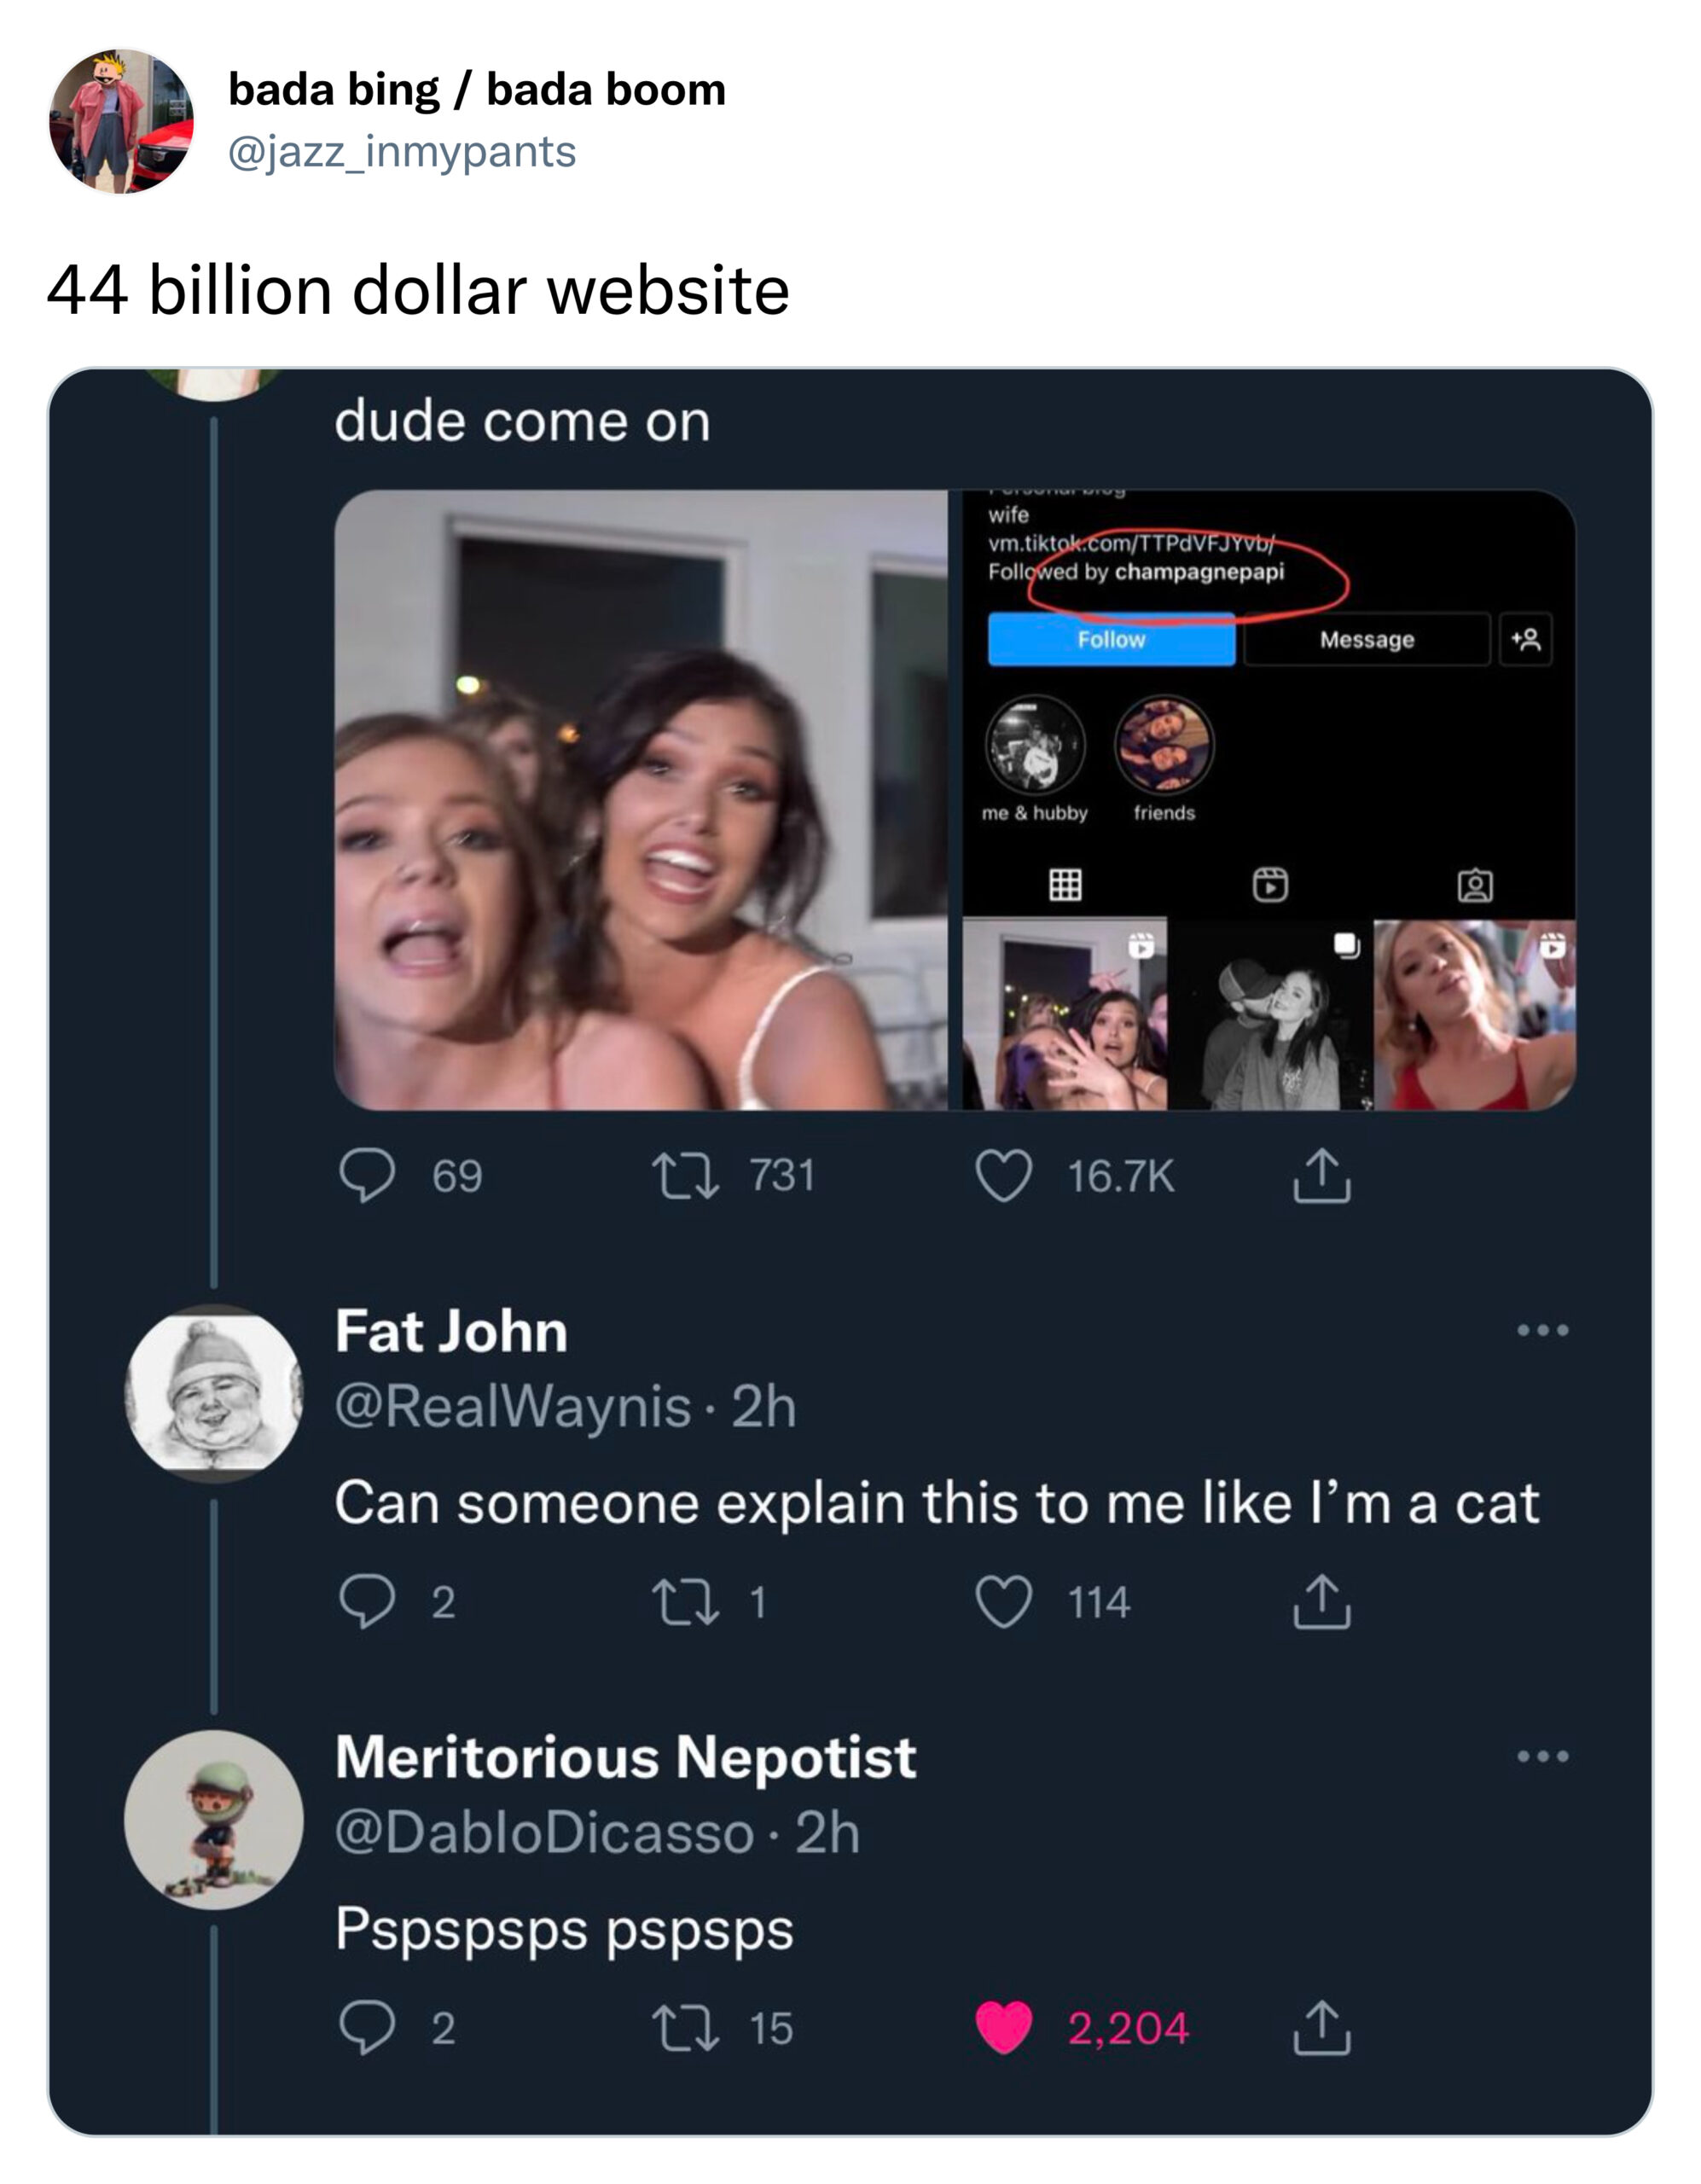 funny tweets - multimedia - bada bing bada boom 44 billion dollar website dude come on 69 731 Fat John . 2h Can someone explain this to me I'm a cat 02 Cz 1 114 Meritorious Nepotist 2h Pspspsps pspsps 2 15 2,204 wife vm.tiktok.comTTPdVFJYvb ed by champagn